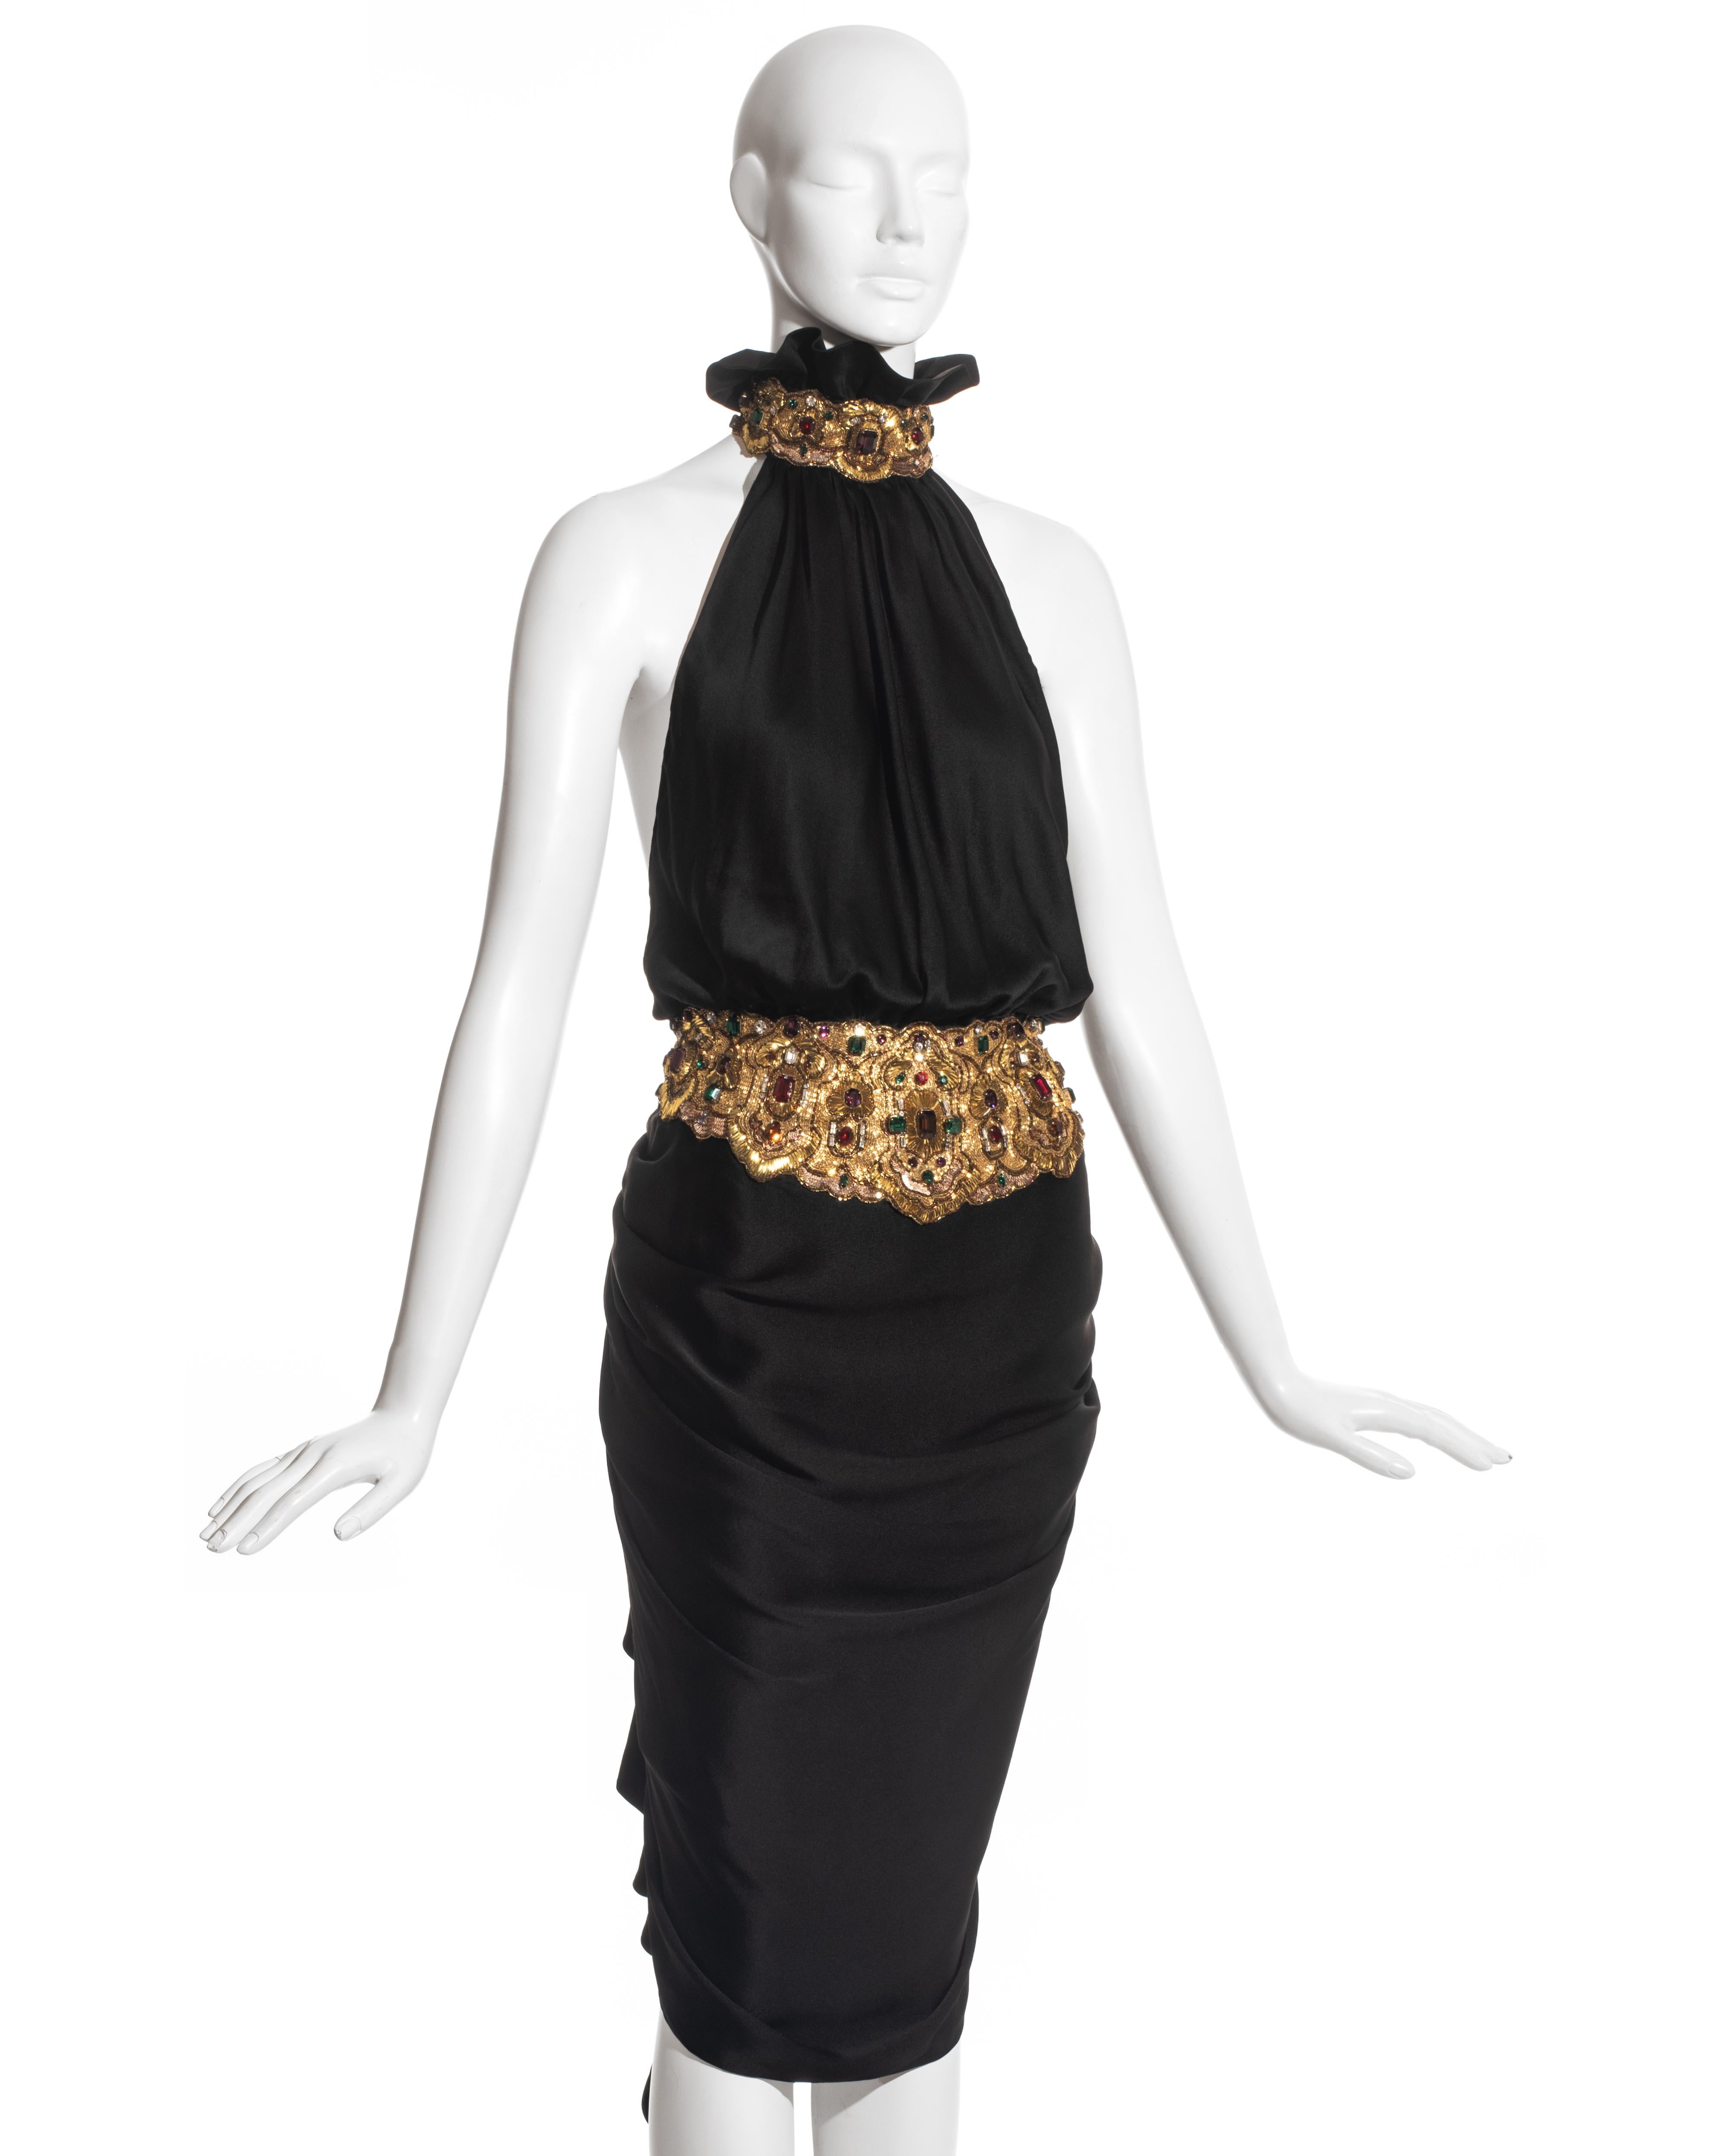 Jean Patou by Christian Lacroix black silk cocktail dress with halter neck ruffled collar, gold tone metal embroidery with clear, ruby and emerald coloured gems, horizontal drapes on front of the skirt forming into a knotted hanging sash at the